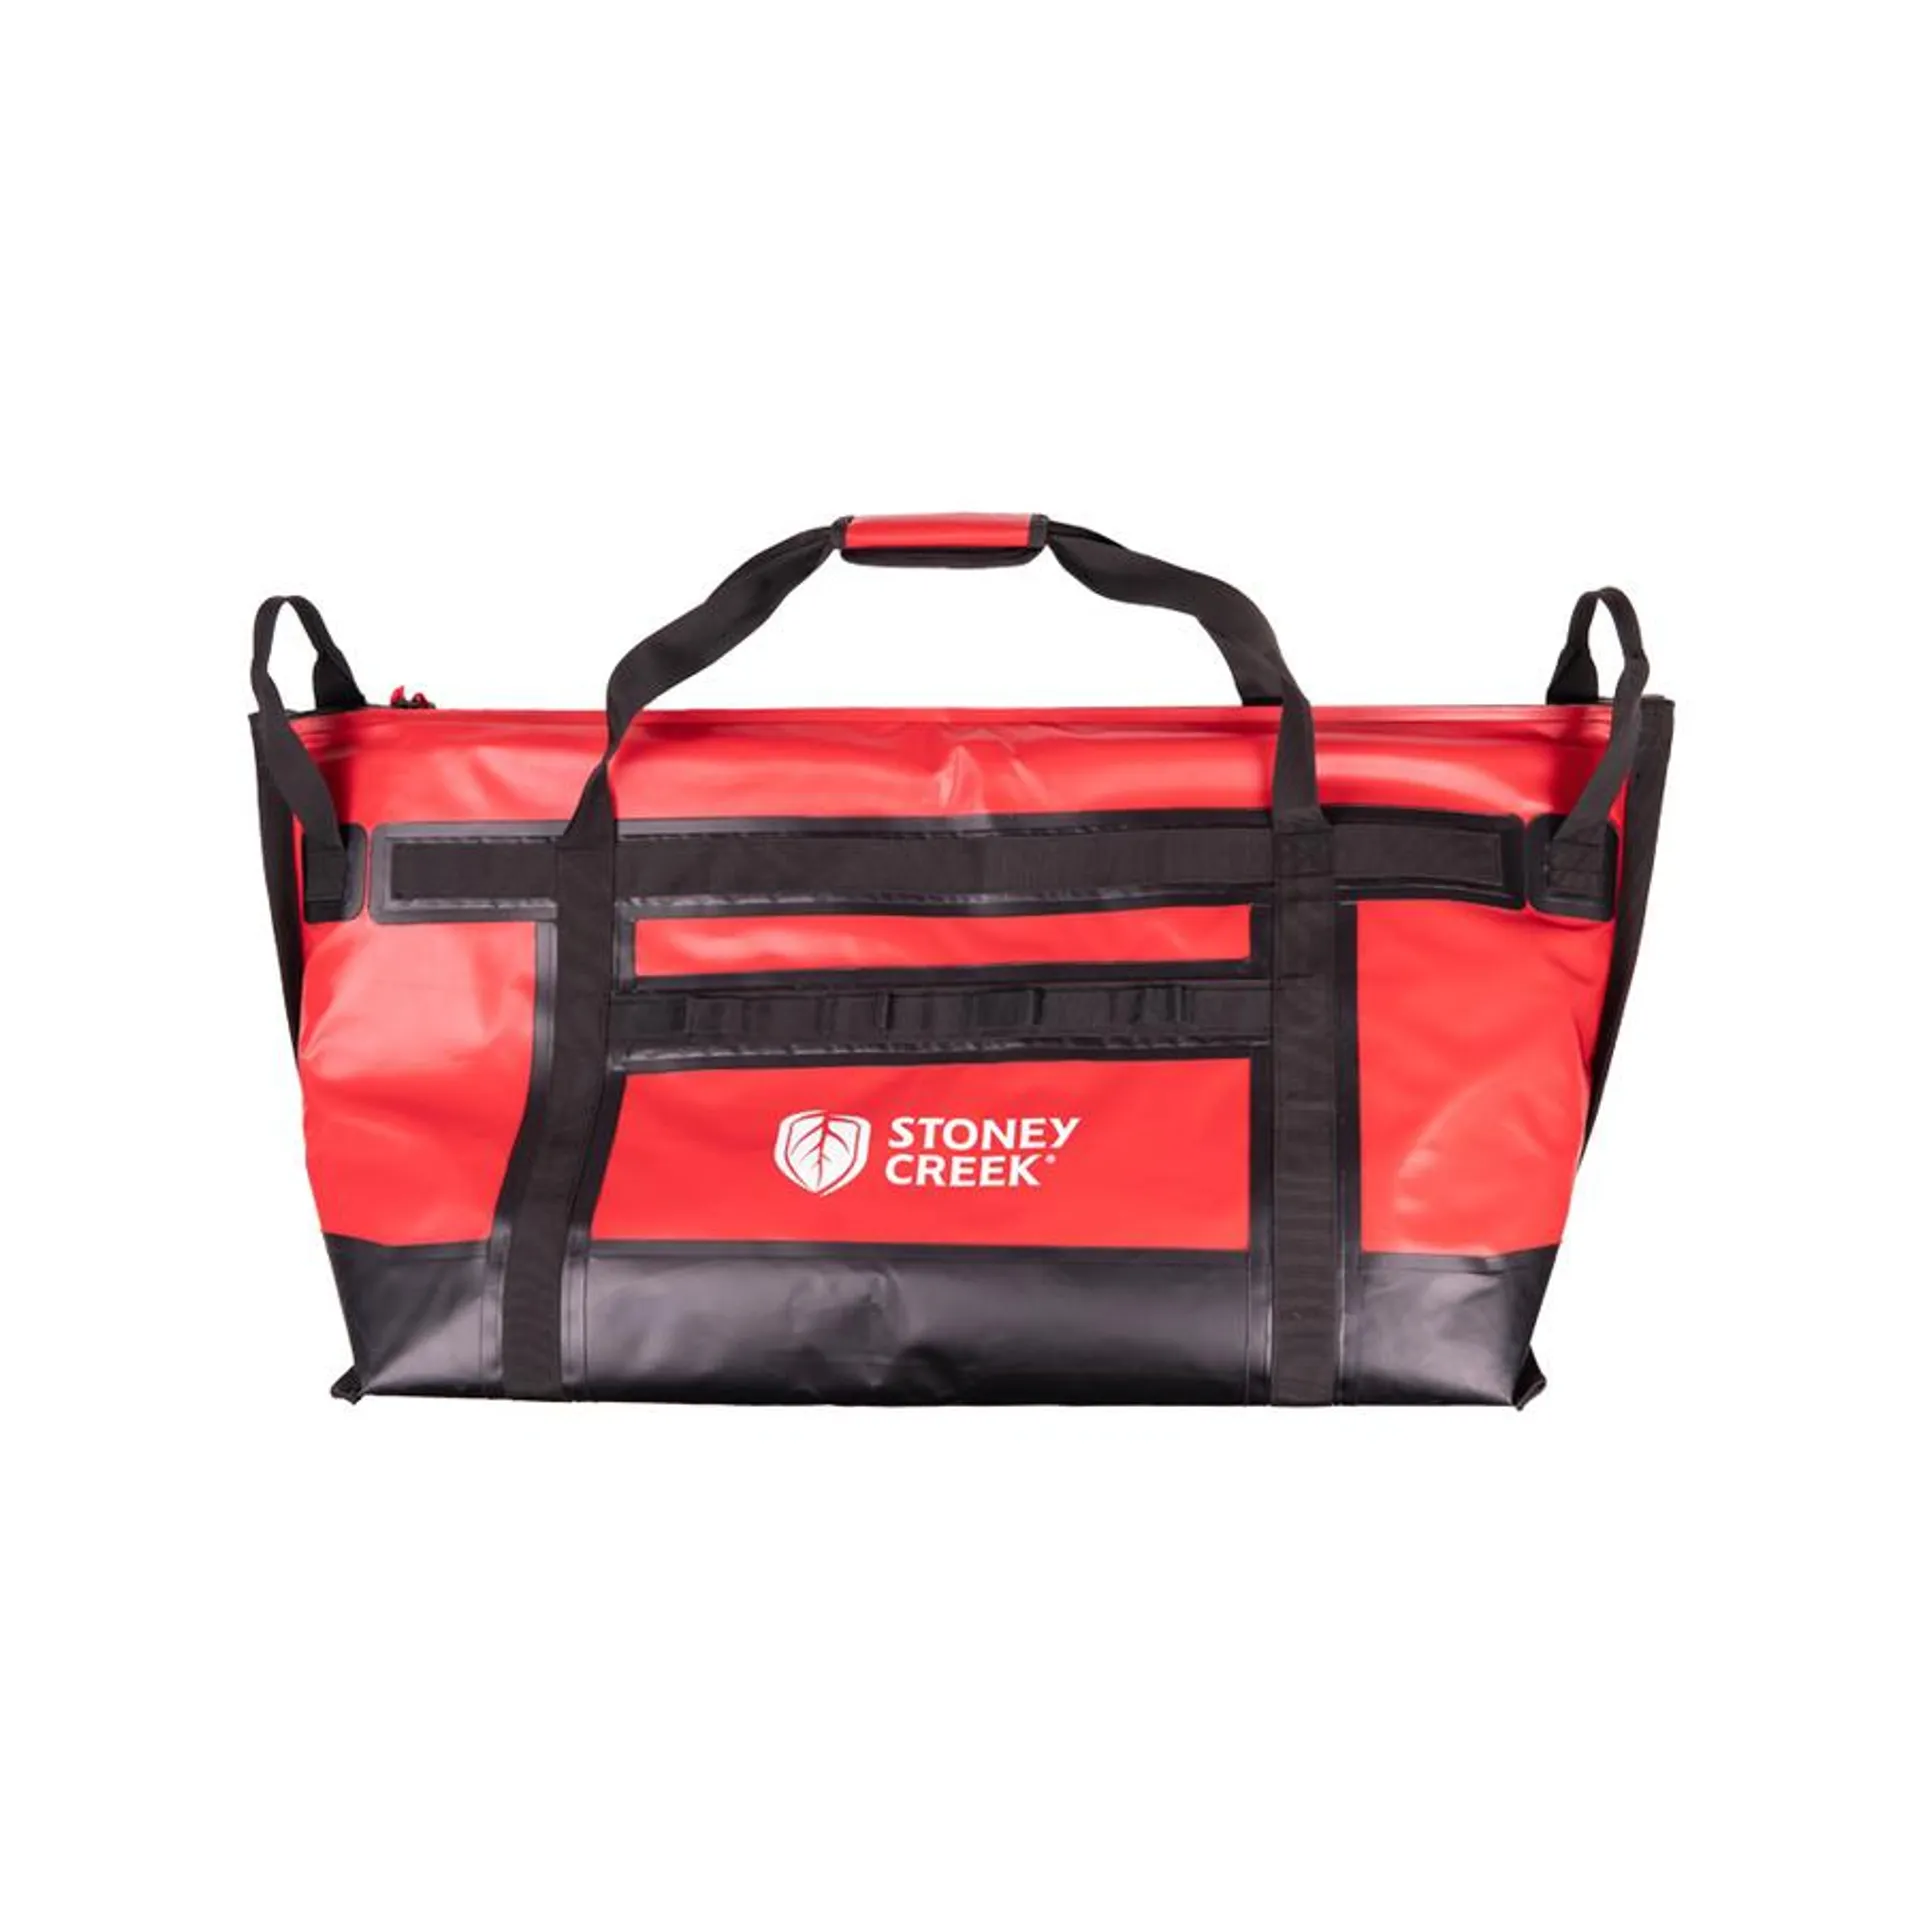 Stoney Creek Provider Bag Fiery Red 100cm Extra Large